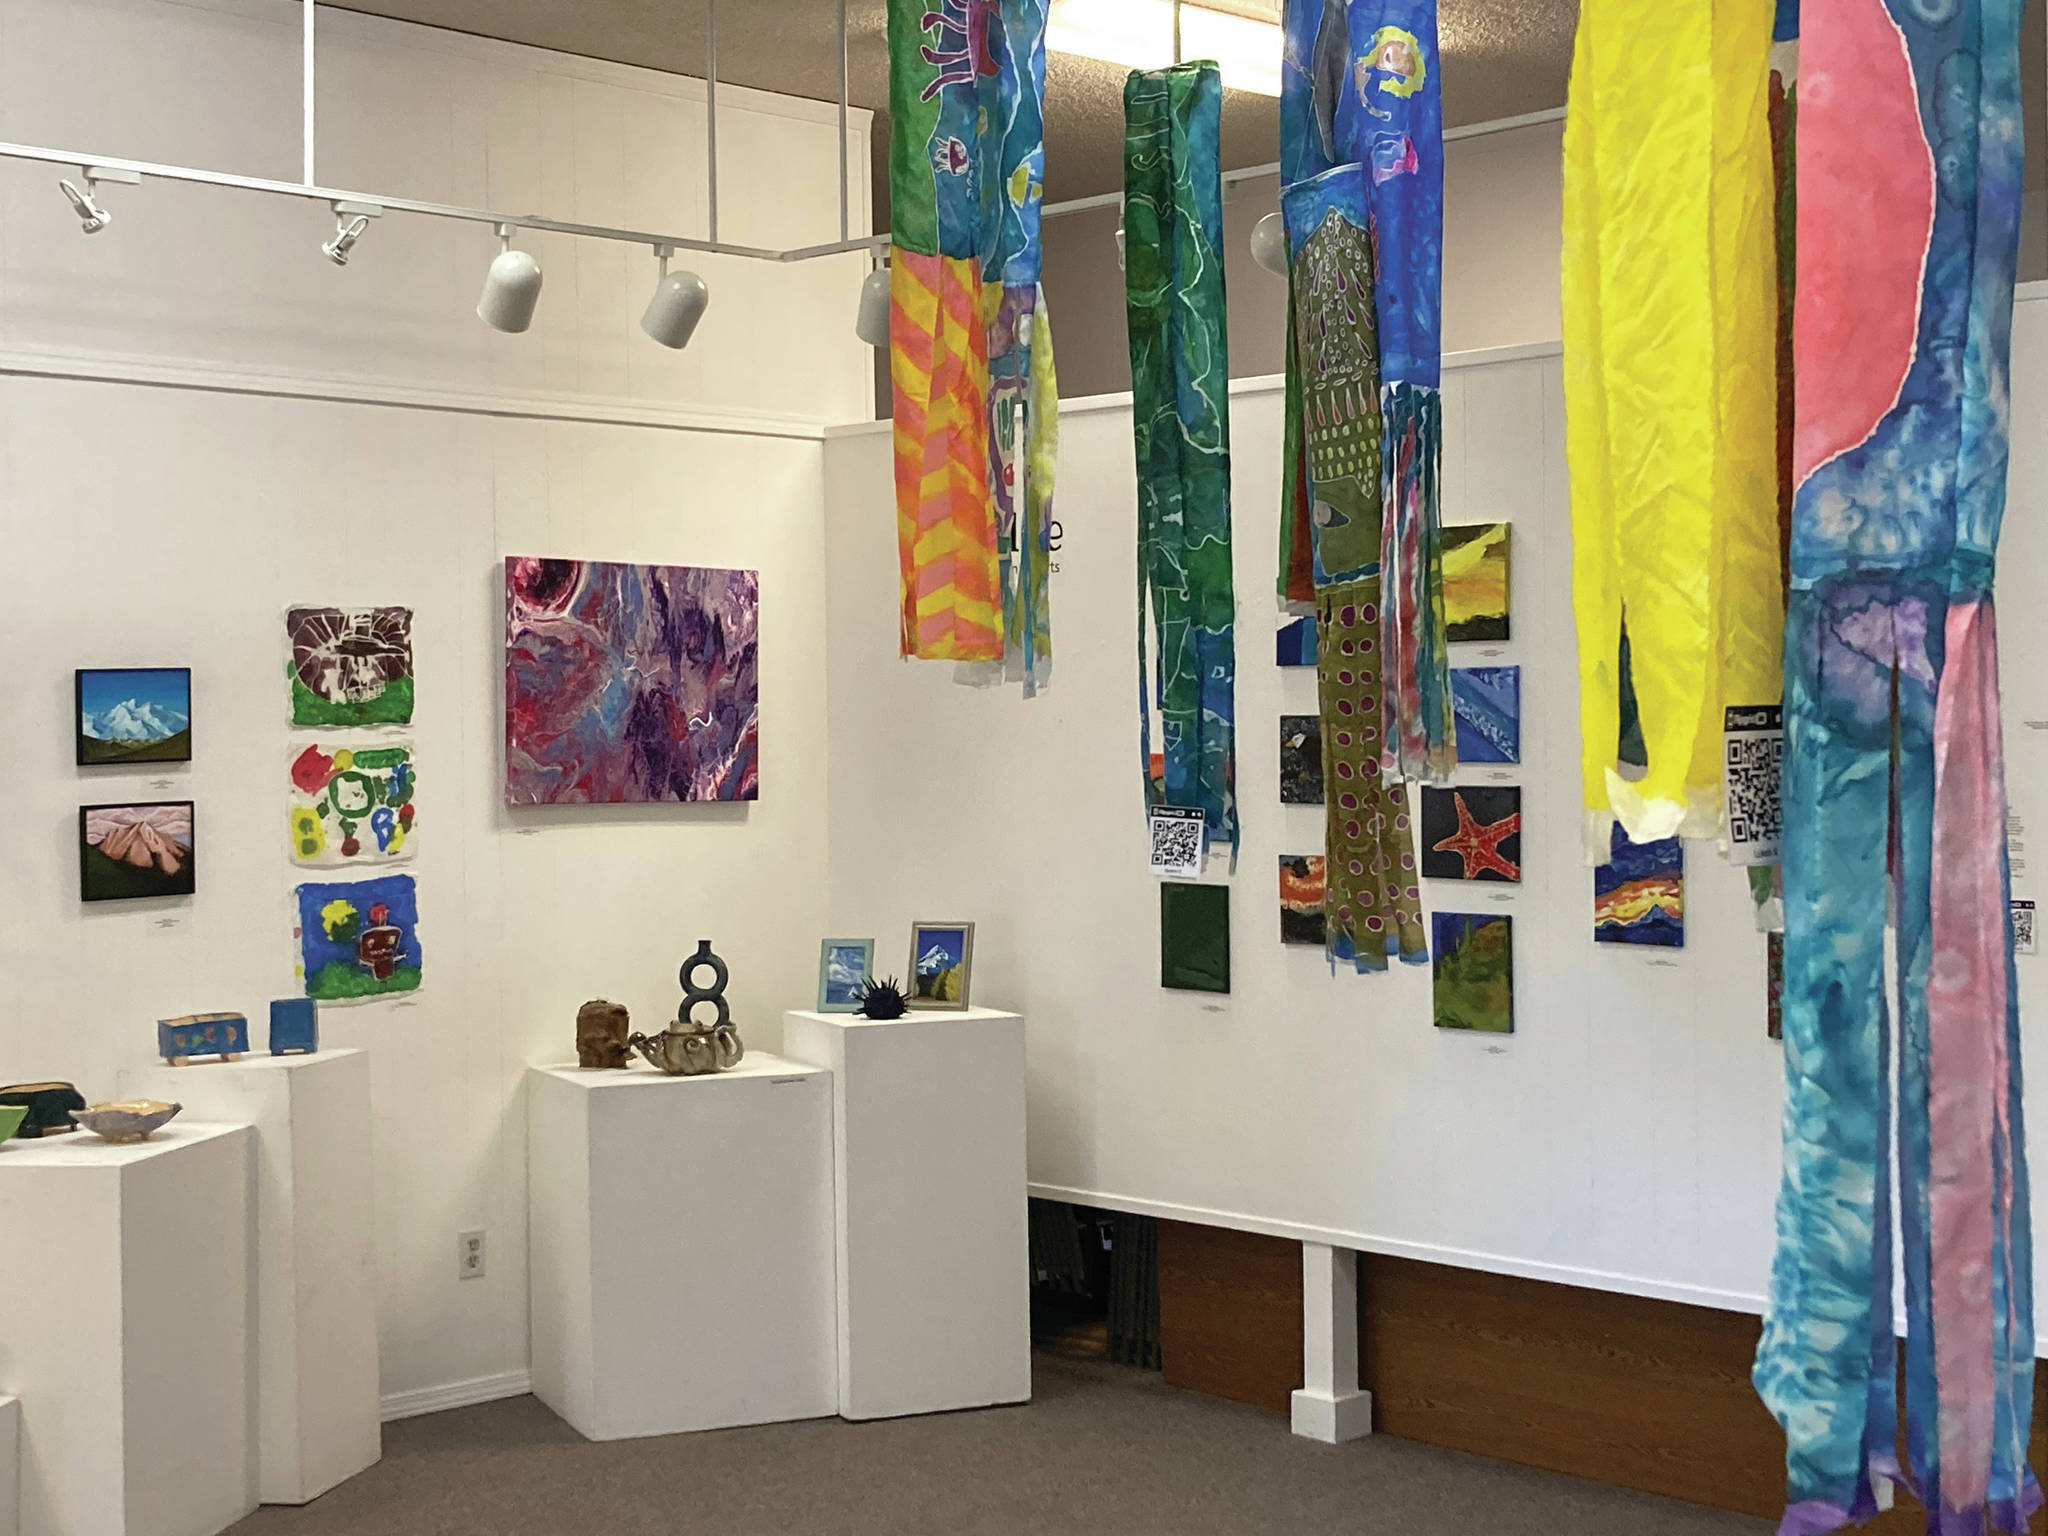 The Jubilee youth art show opened on Friday, April 2, 2021, at the Homer Council on the Arts in Homer, Alaska. (Photo by Michael Armstrong/Homer News)